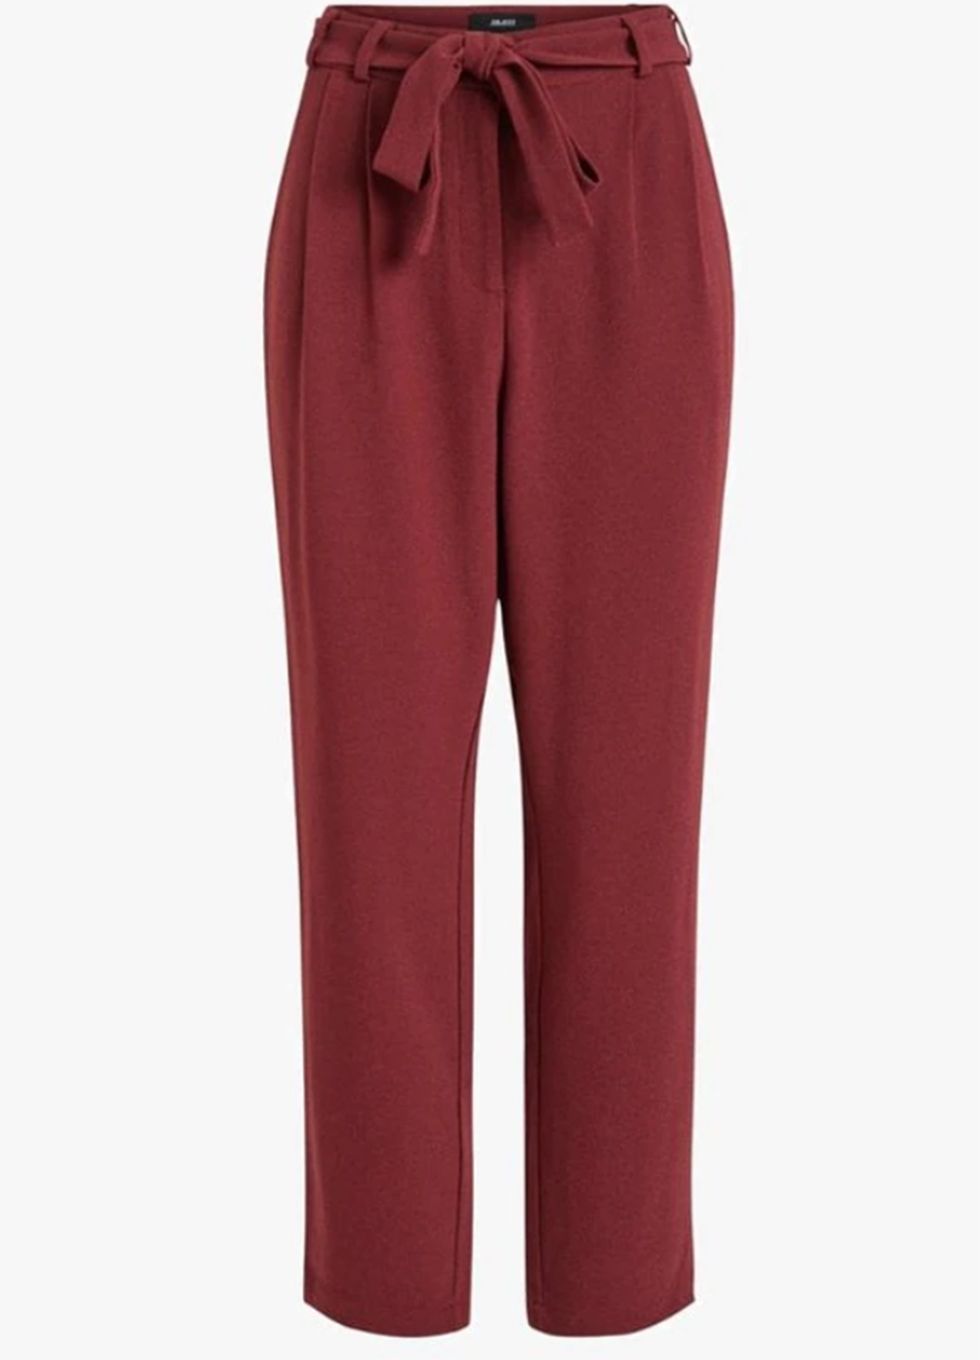 Clothing, Trousers, Maroon, Active pants, Pocket, Waist, Suit trousers, Sportswear, sweatpant, 